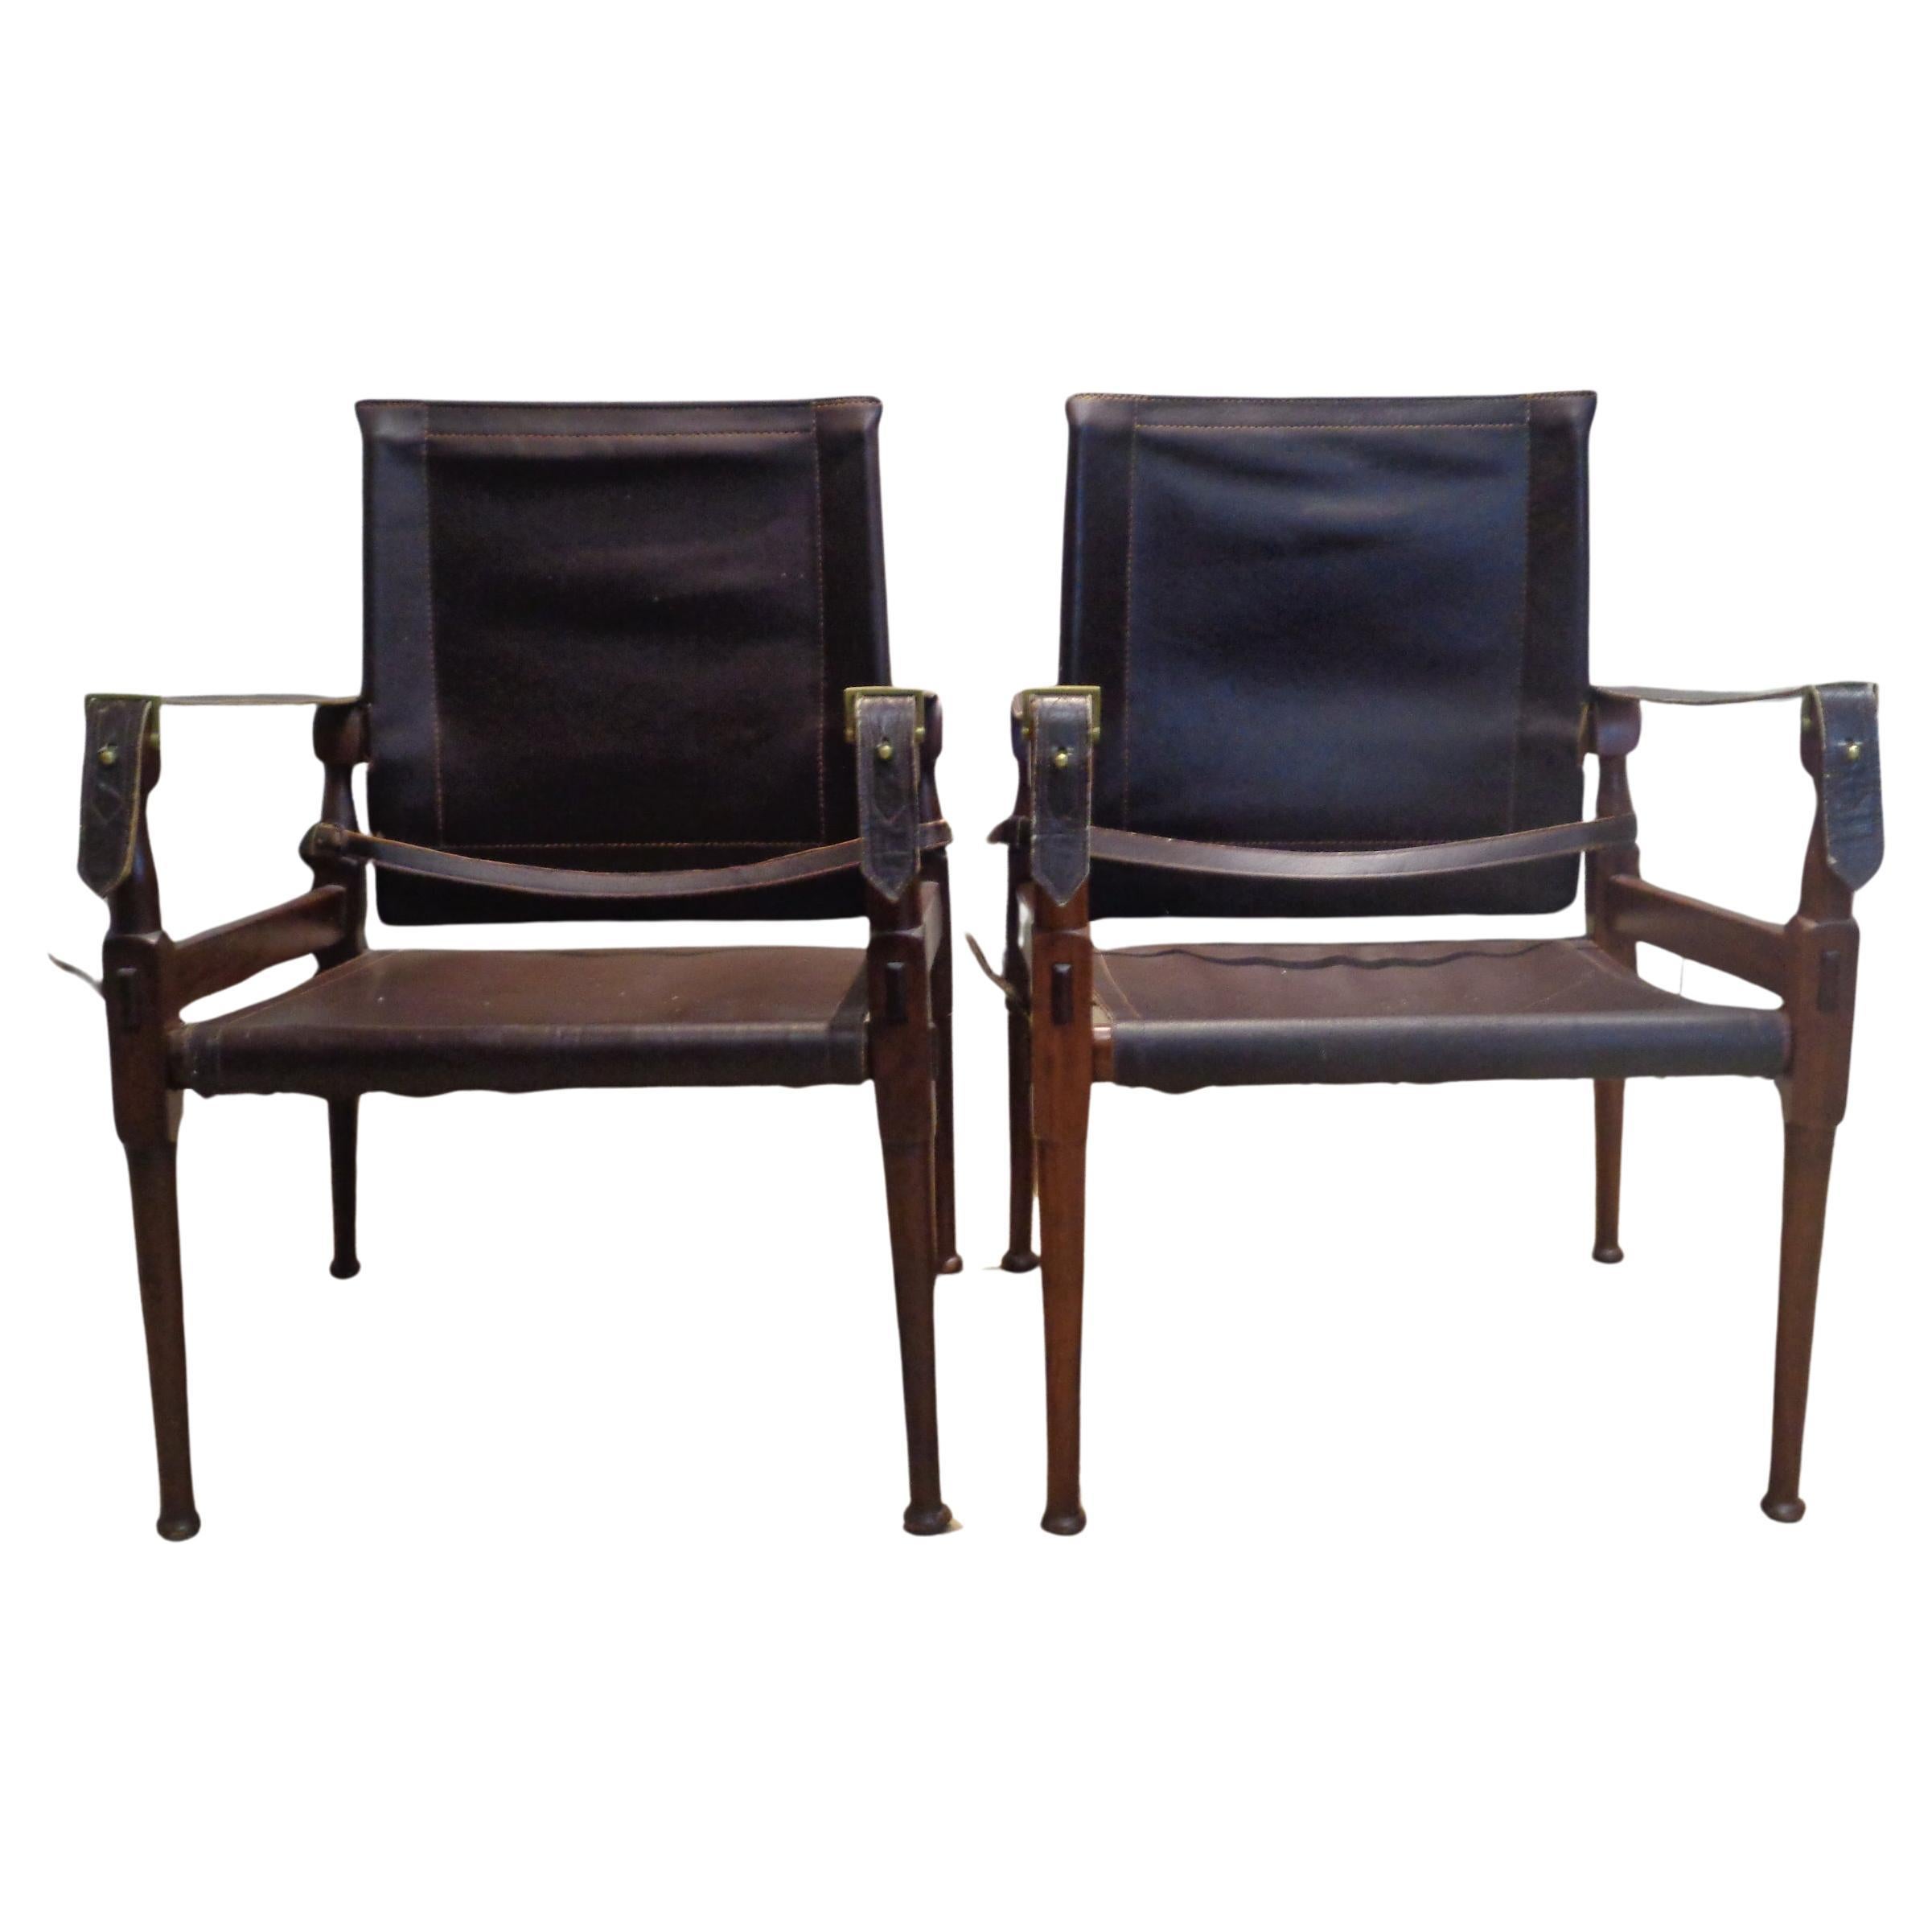 Pair of safari chairs in the British Colonial Campaign style. Mahogany framework  w/ turned and mortised construction and beautifully aged color / dark chocolate brown stitched leather seats and backs / stitched leather arm straps w/ brass buckles,